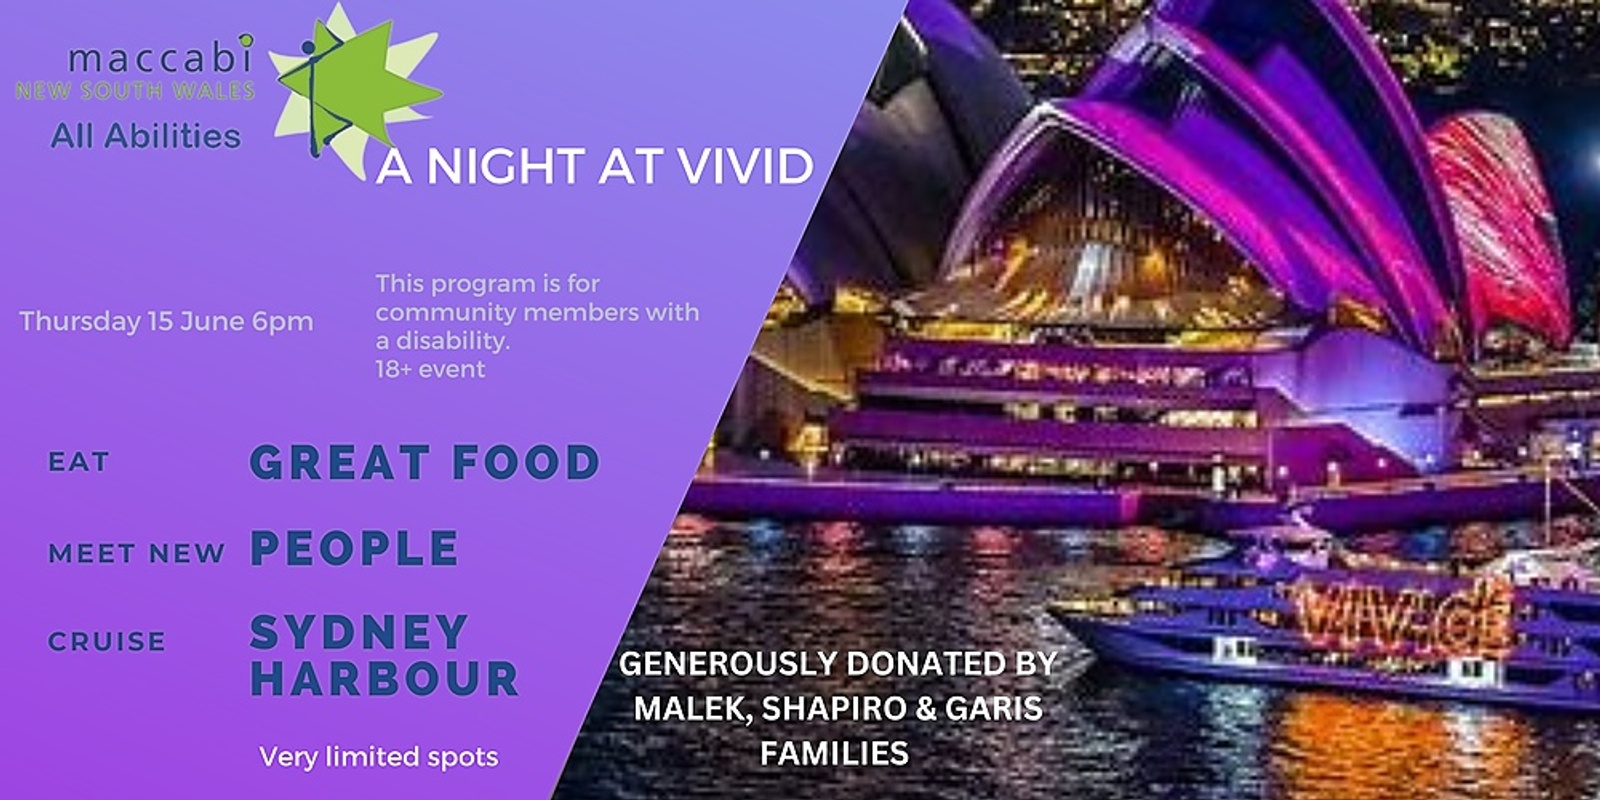 Banner image for Maccabi All Abilities Vivid Cruise